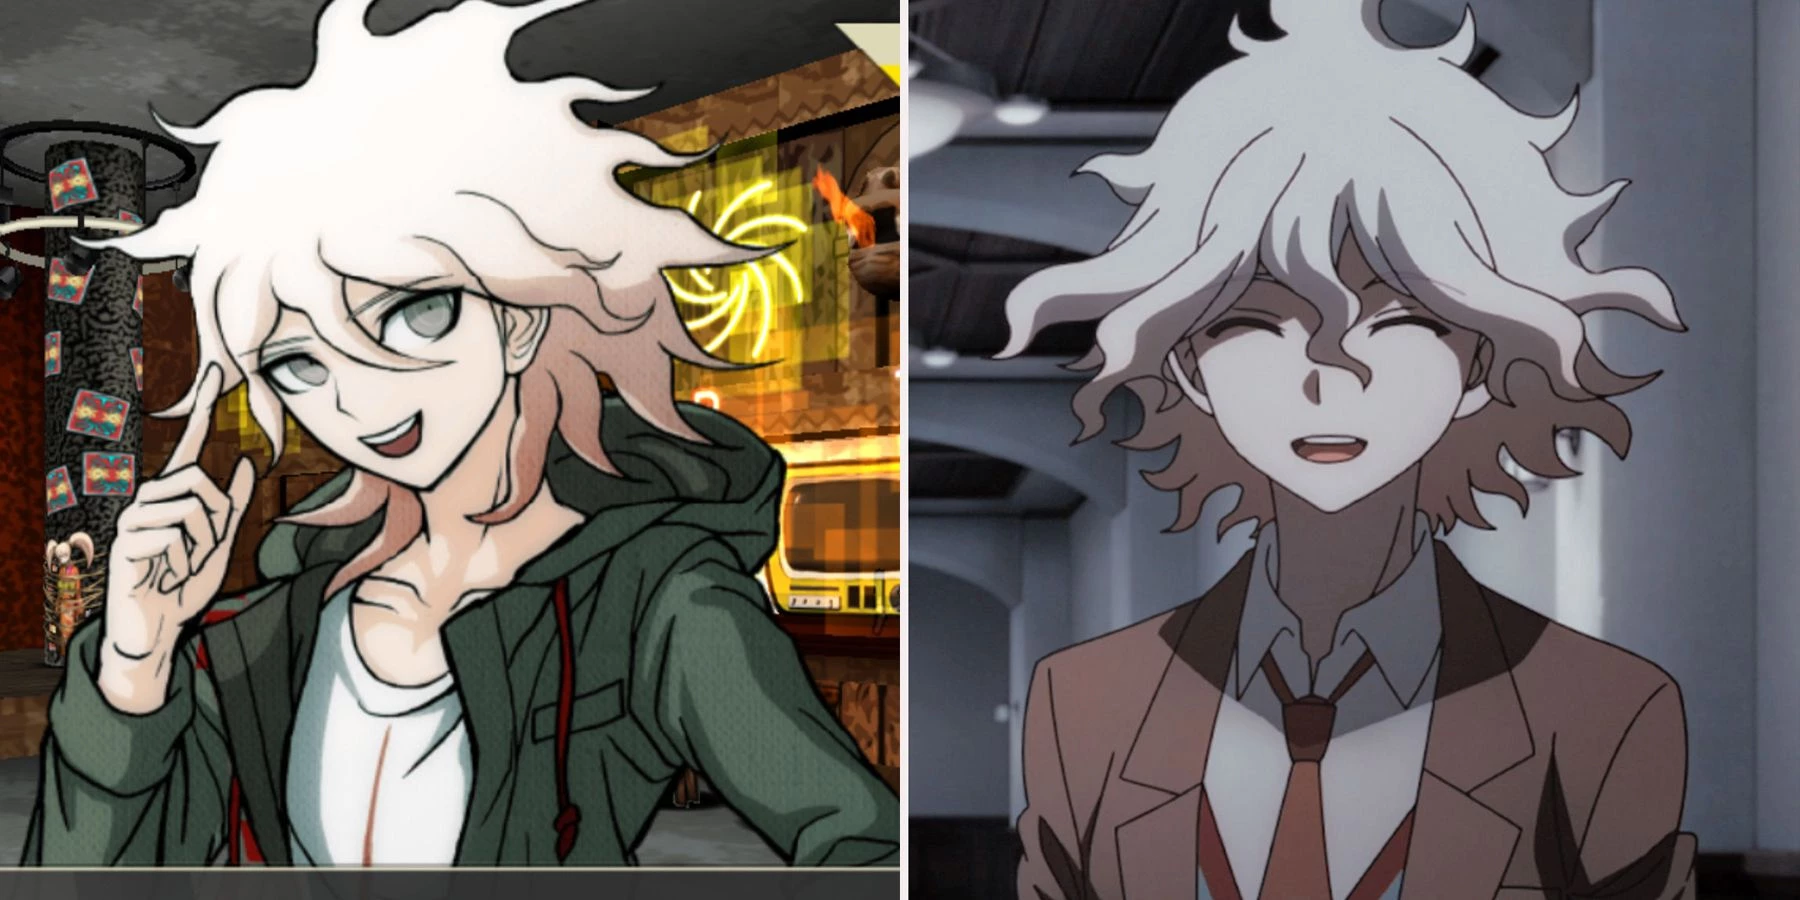 Things You Didn't Know About Danganronpa's Nagito Komaeda | Game Live Story